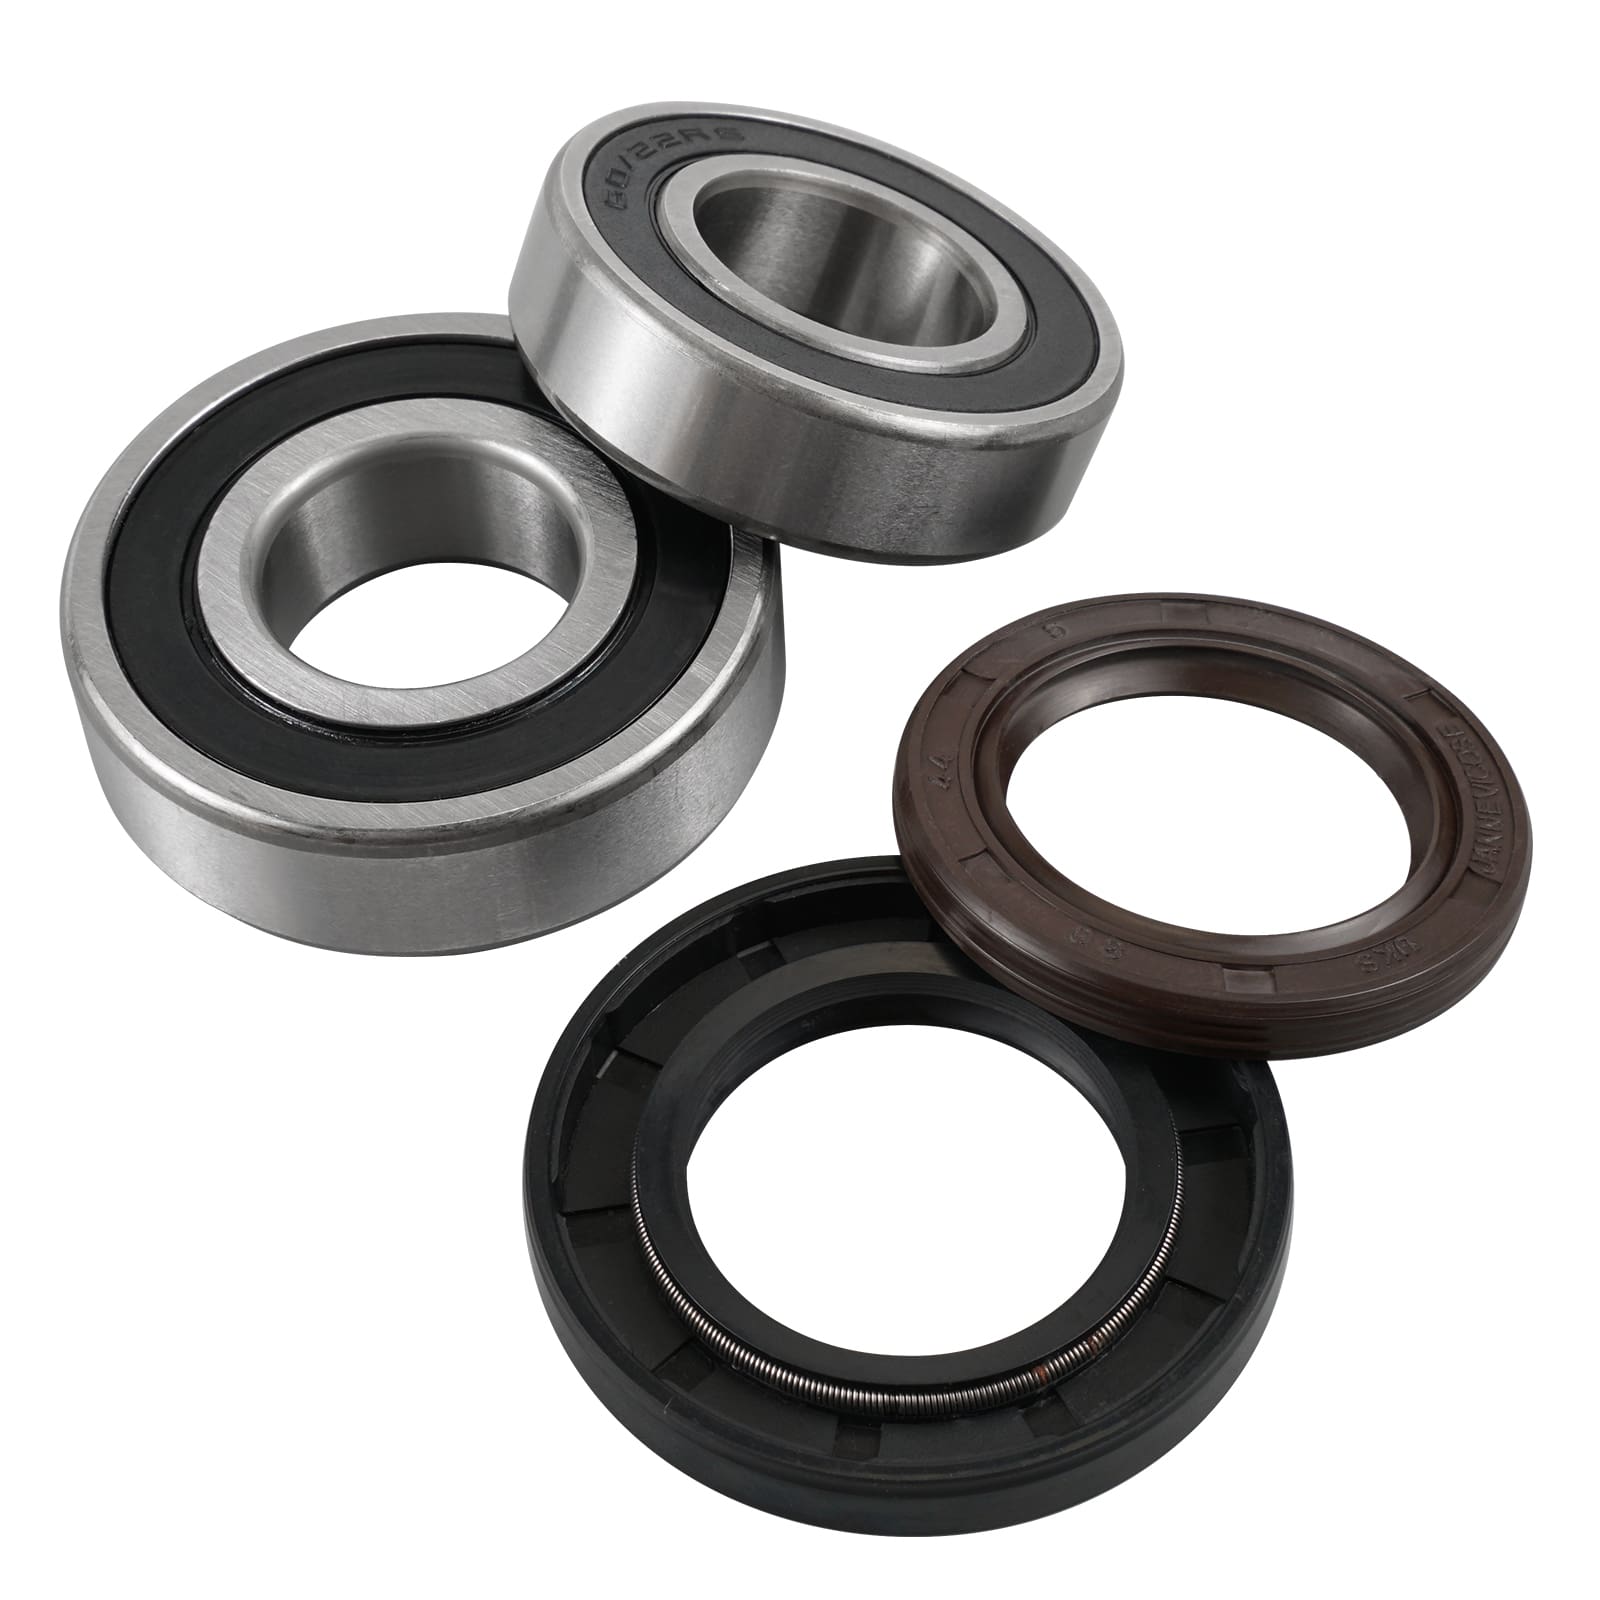 Rear Wheel Bearings and Seals Kit For Yamaha YZ125 YZ250 WR250F WR450F